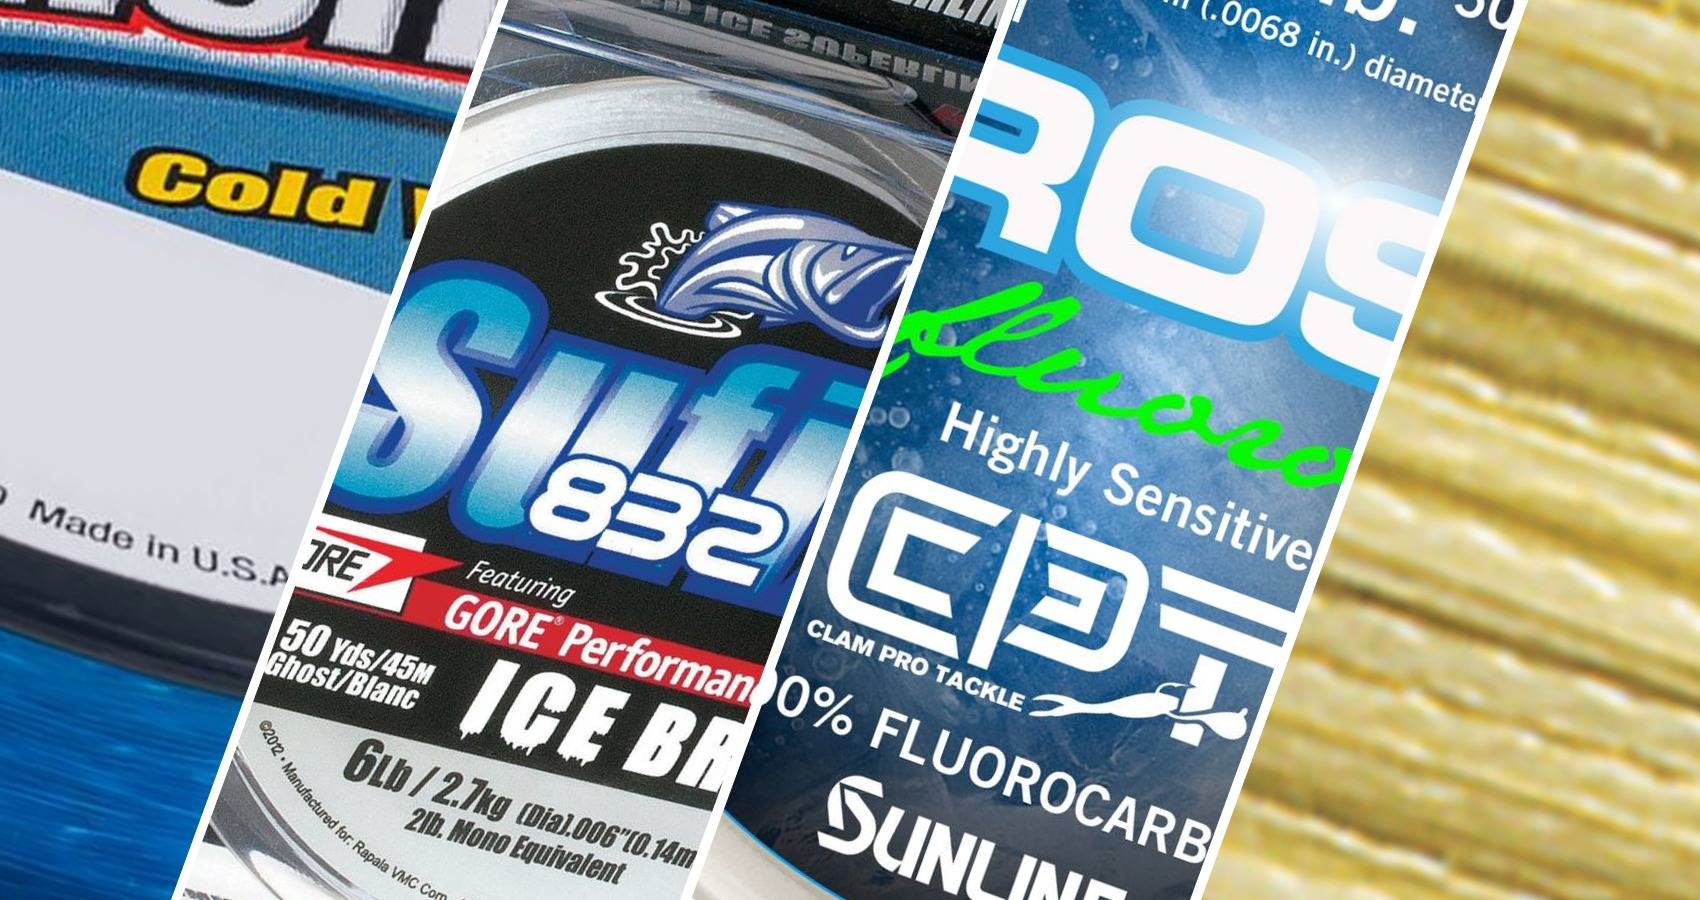 The 8 Best Ice Fishing Ice Line reviews in 2019